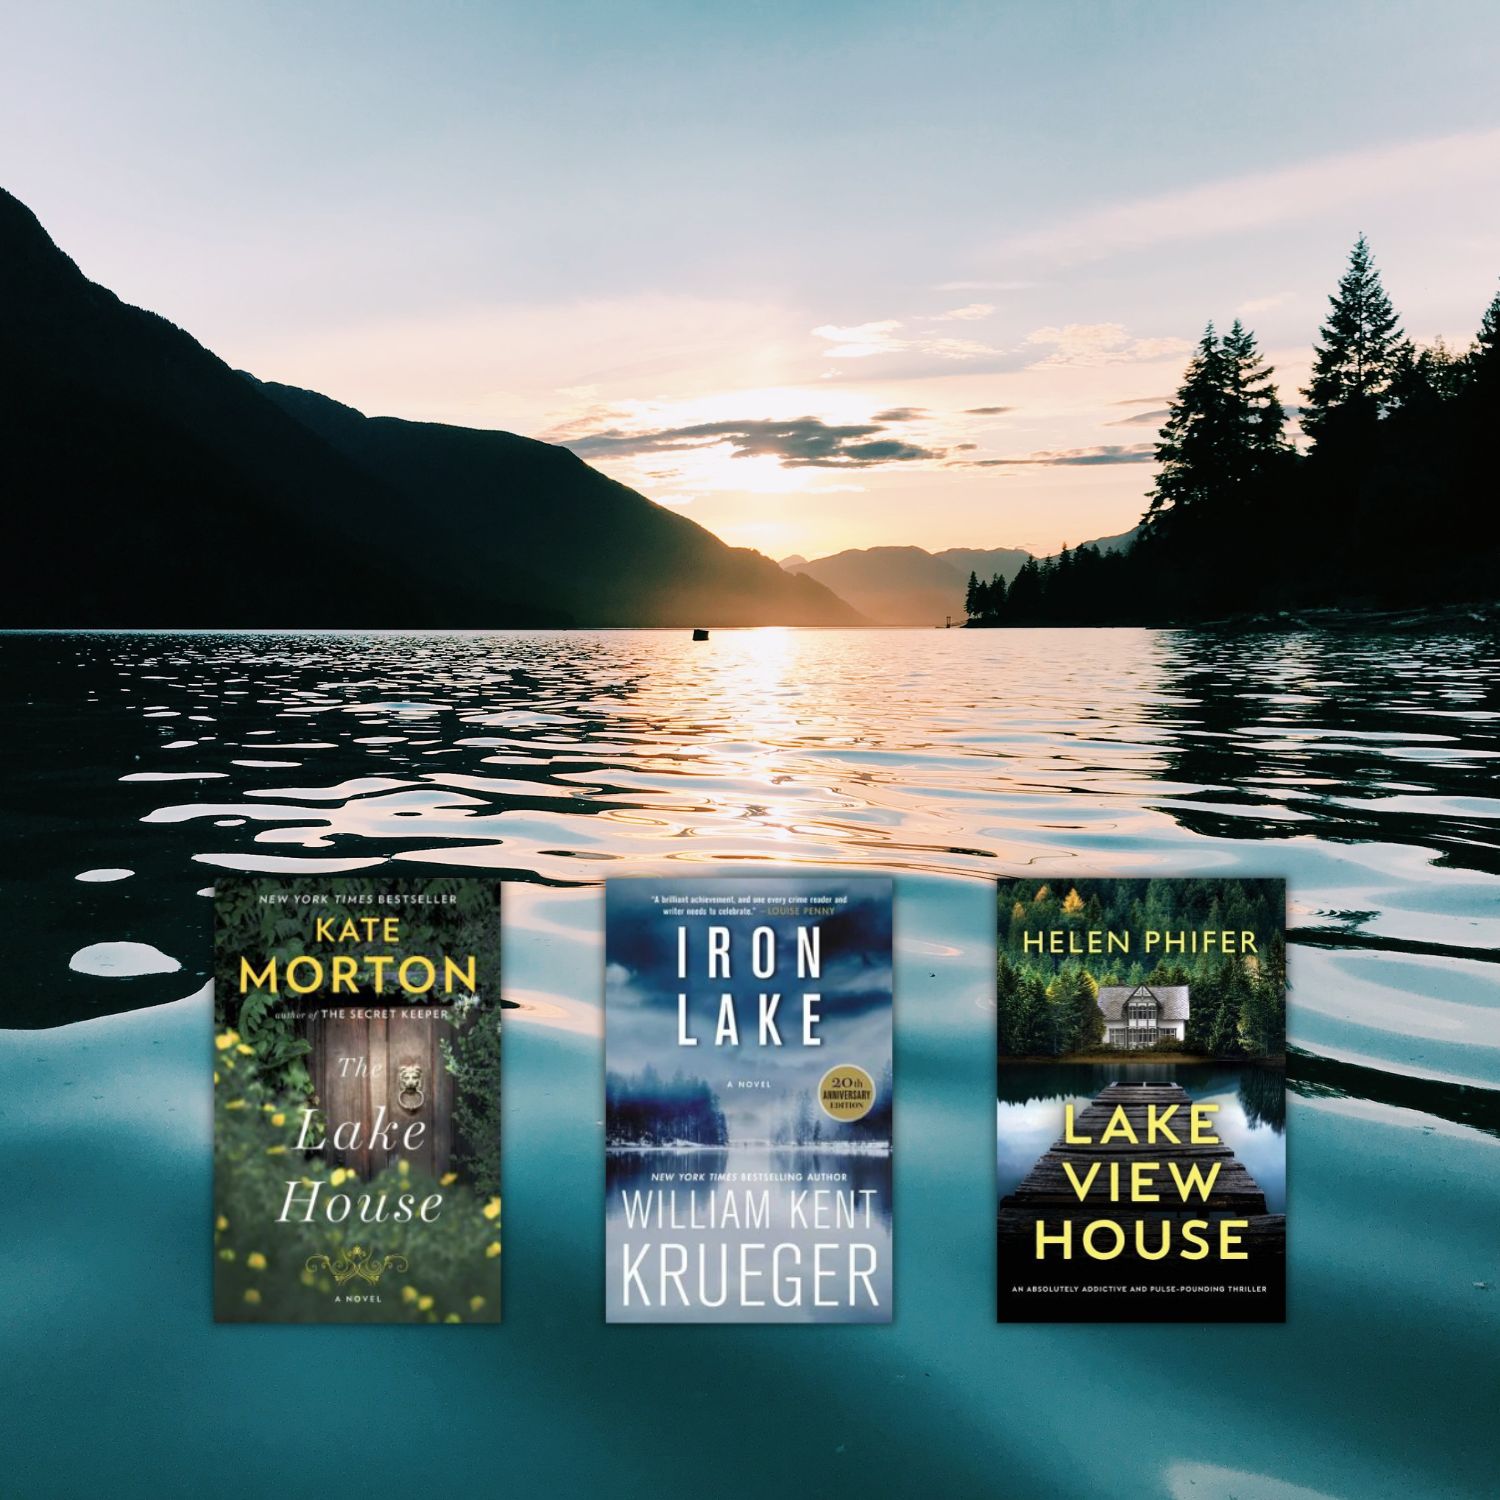 image of a lake at dusk with three book covers overlayed